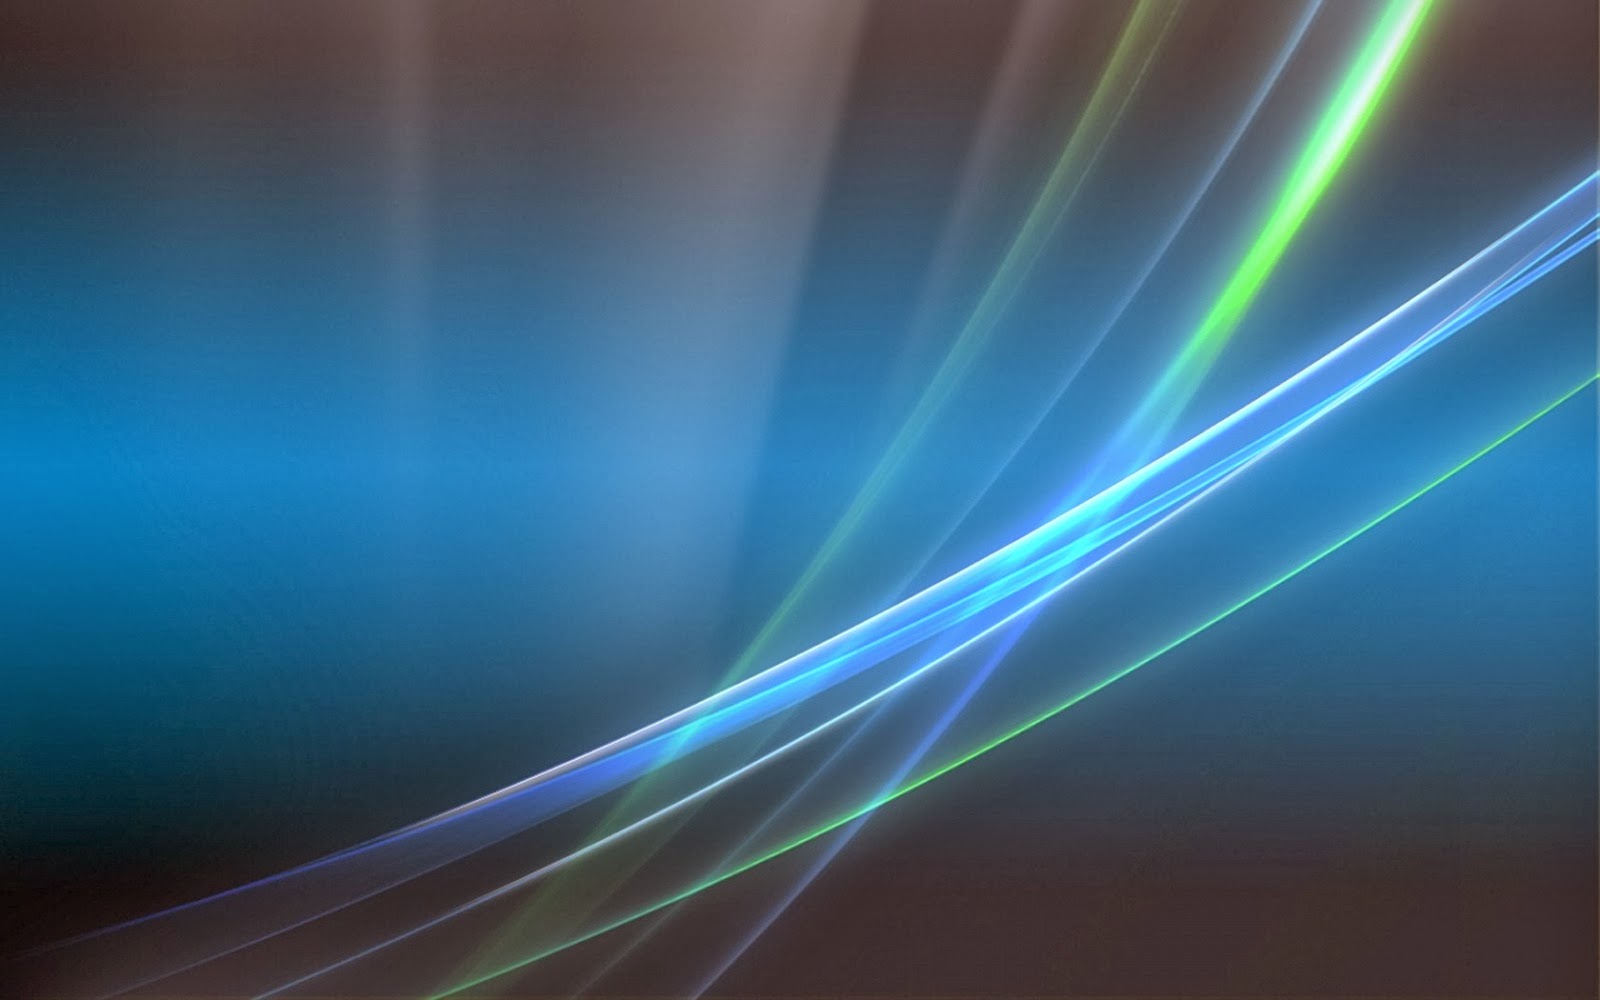 All new wallpaper : The Background Image (Wallpaper) Windows 7